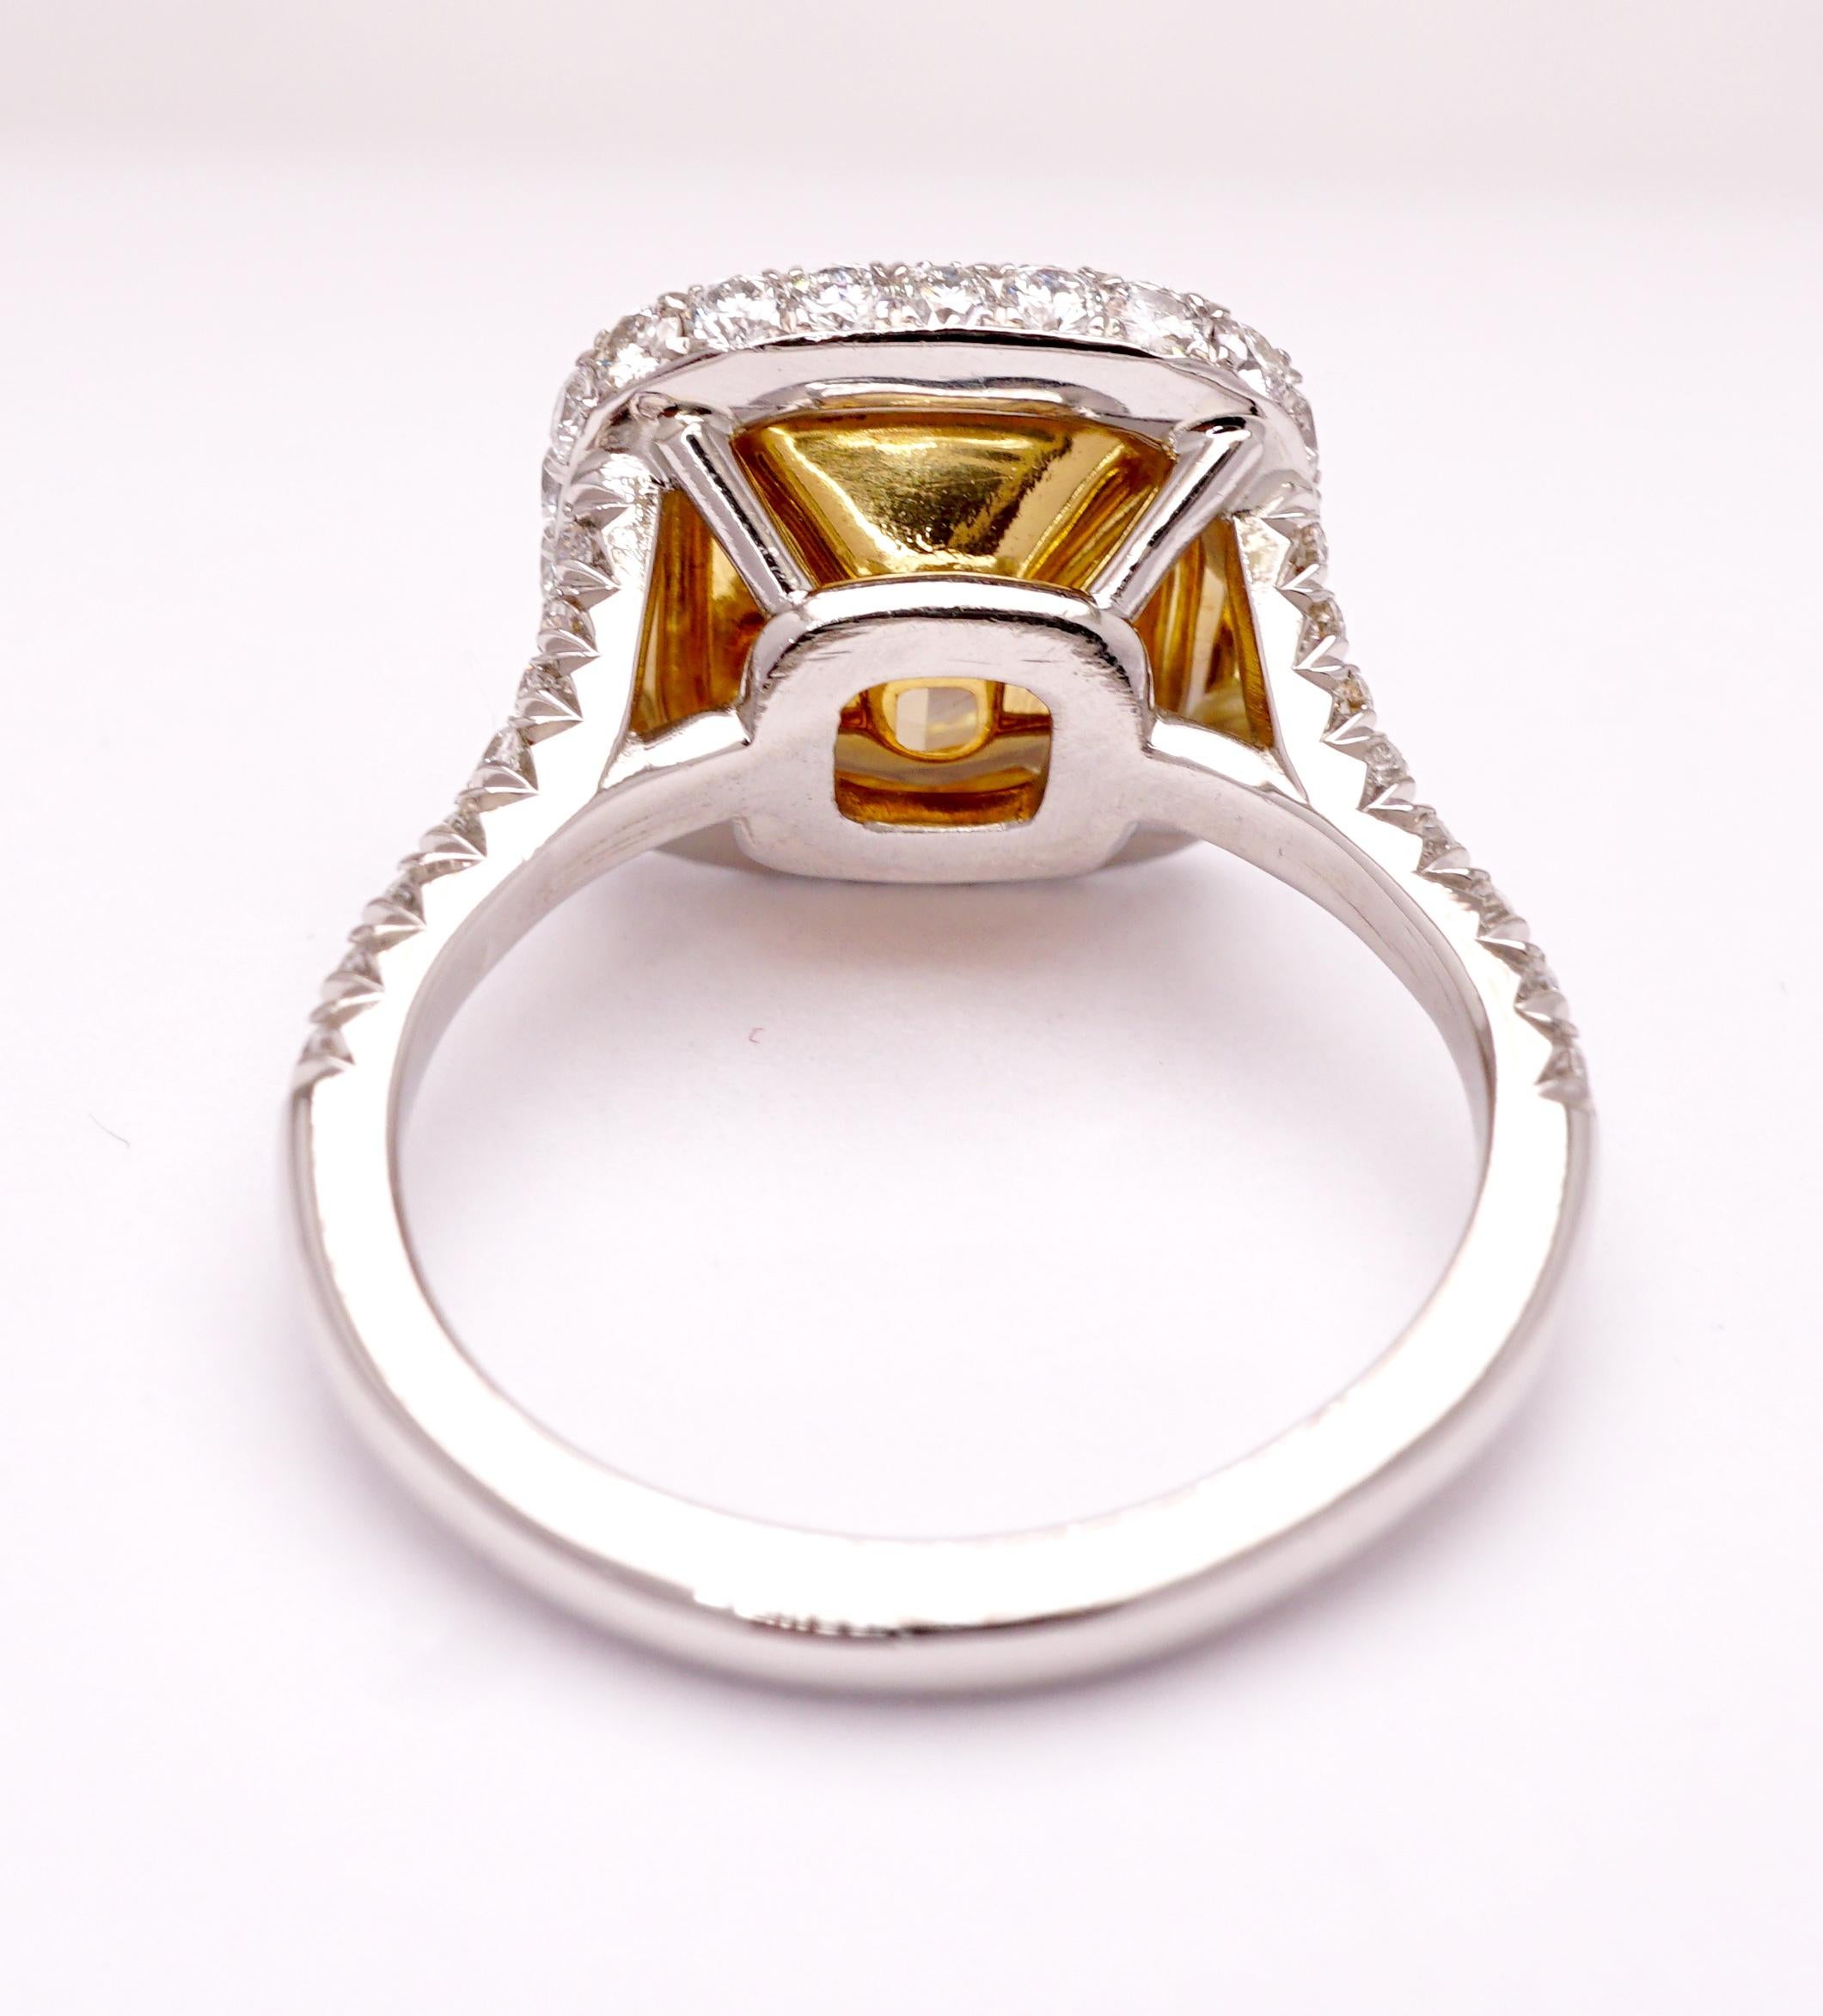 Certified Fancy Yellow Radiant 2.84 Carat Diamond Cocktail Ring Set in Platinum In New Condition For Sale In New York, NY